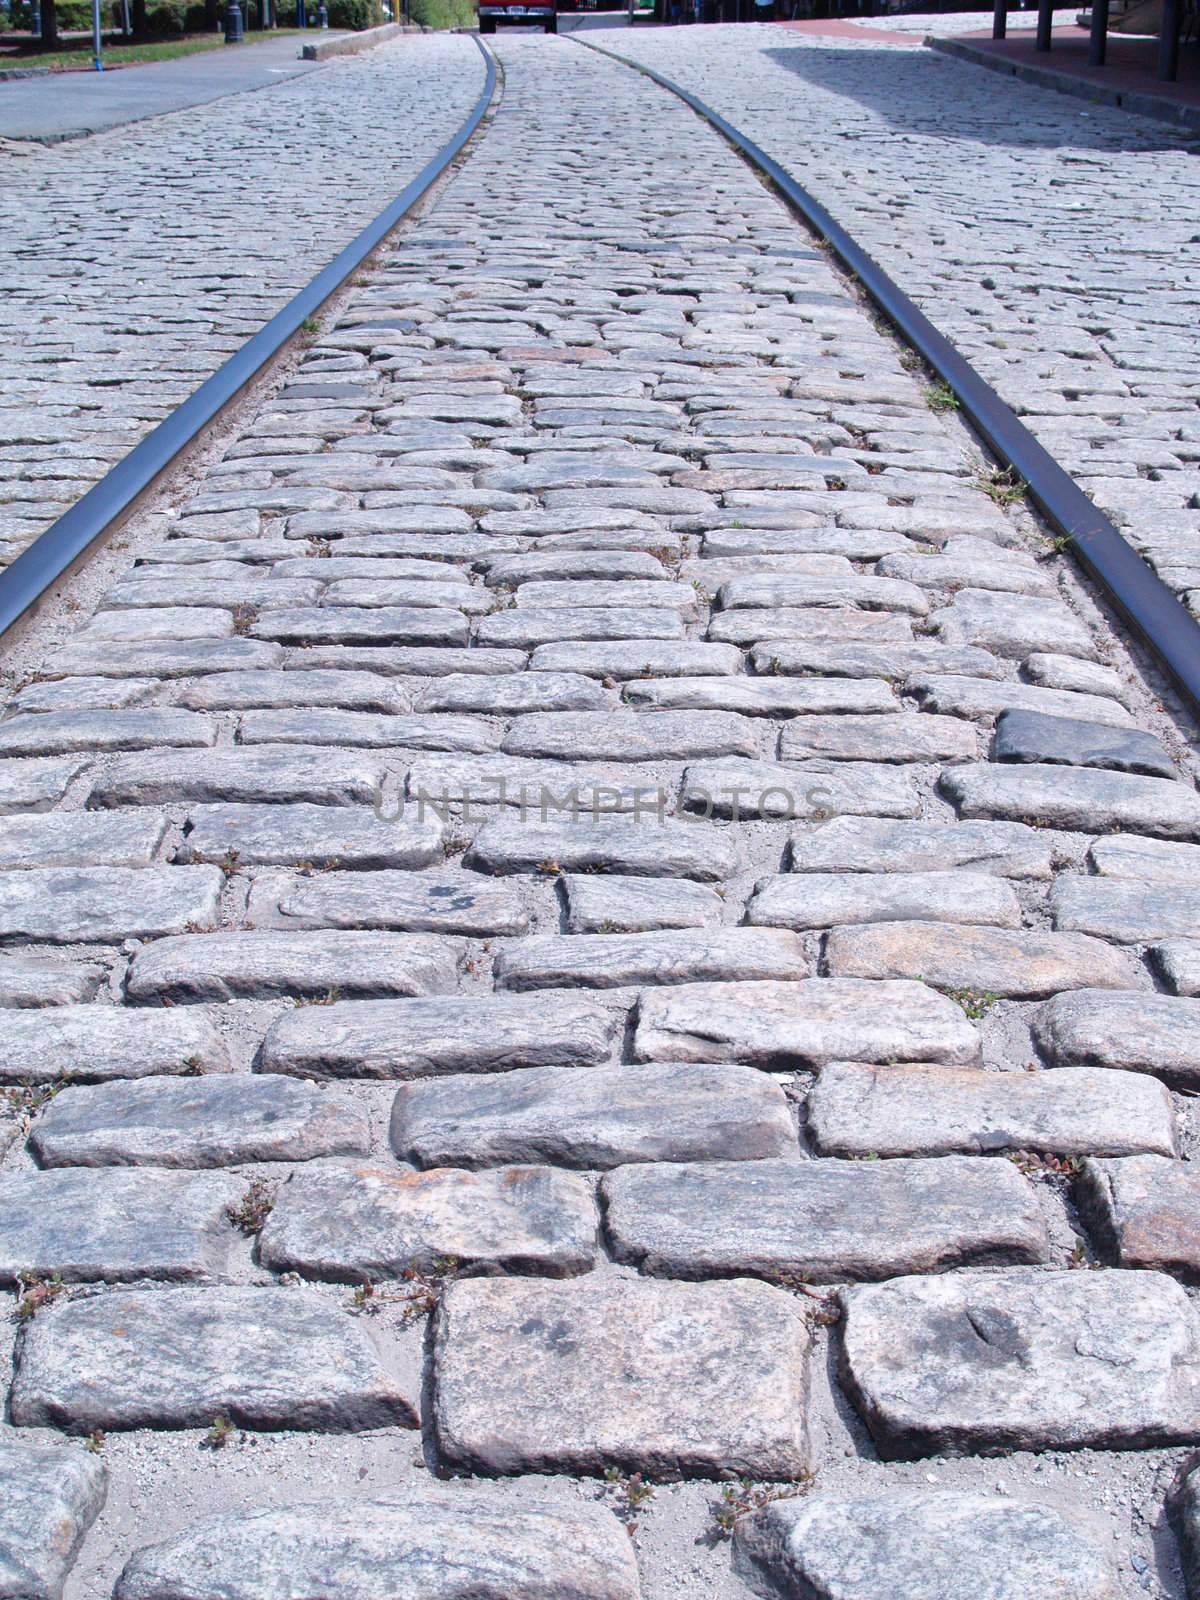 Train tracks embedded in down the middle of an old cobblestone road. The tracks curve into the distance in this perspective view.